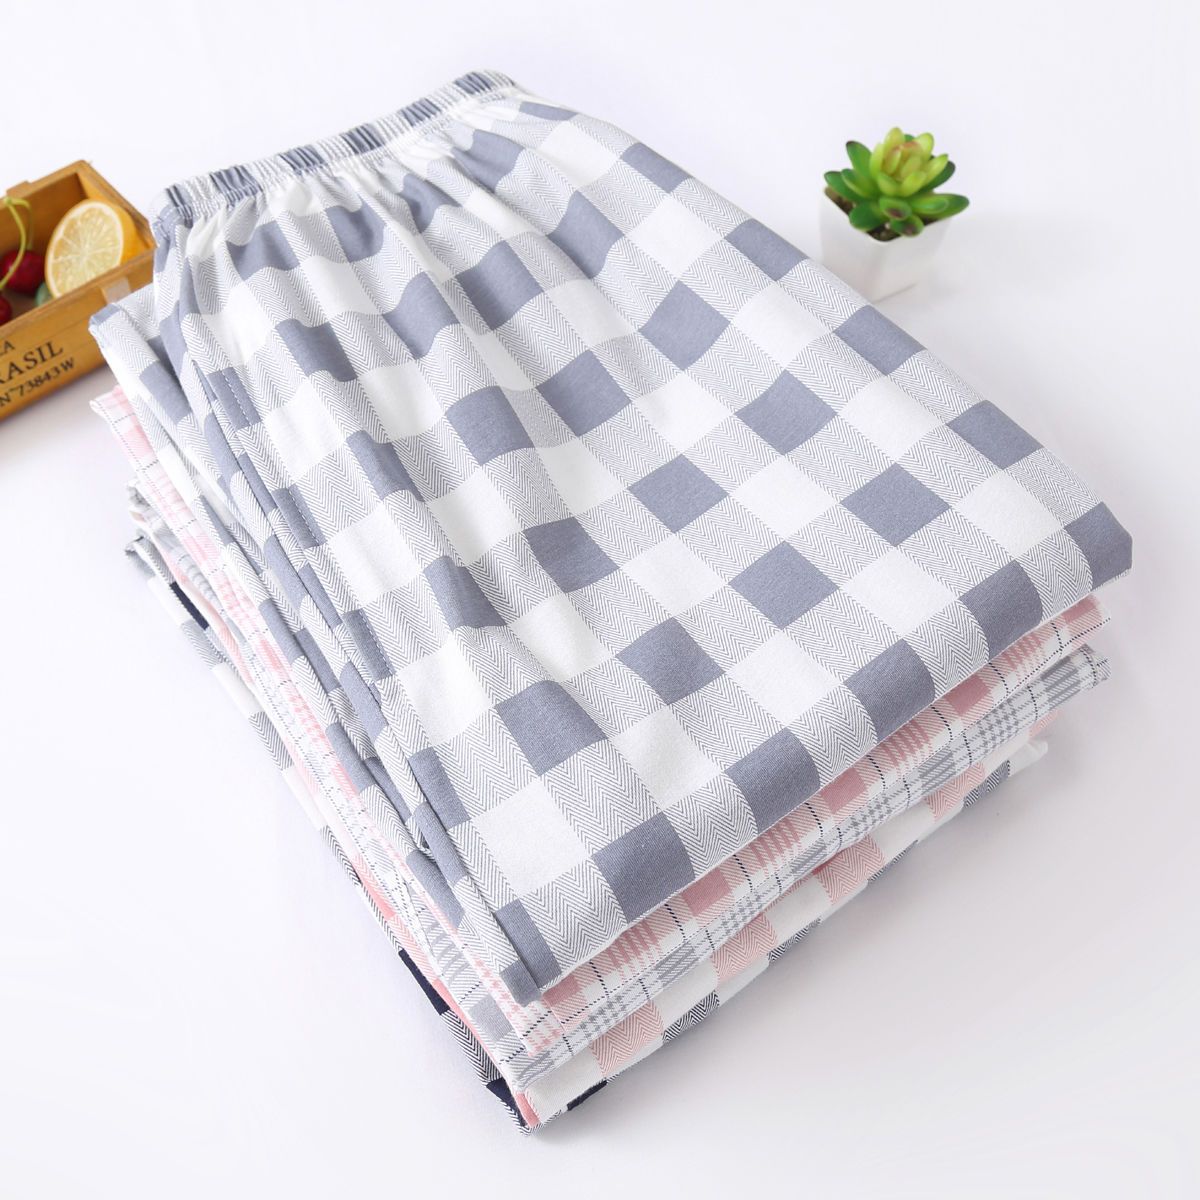 Cotton Men's Pajama Pants Loose Thin Cotton Summer Large Size Home Casual Men's Trousers Spring and Autumn Plaid Home Pants